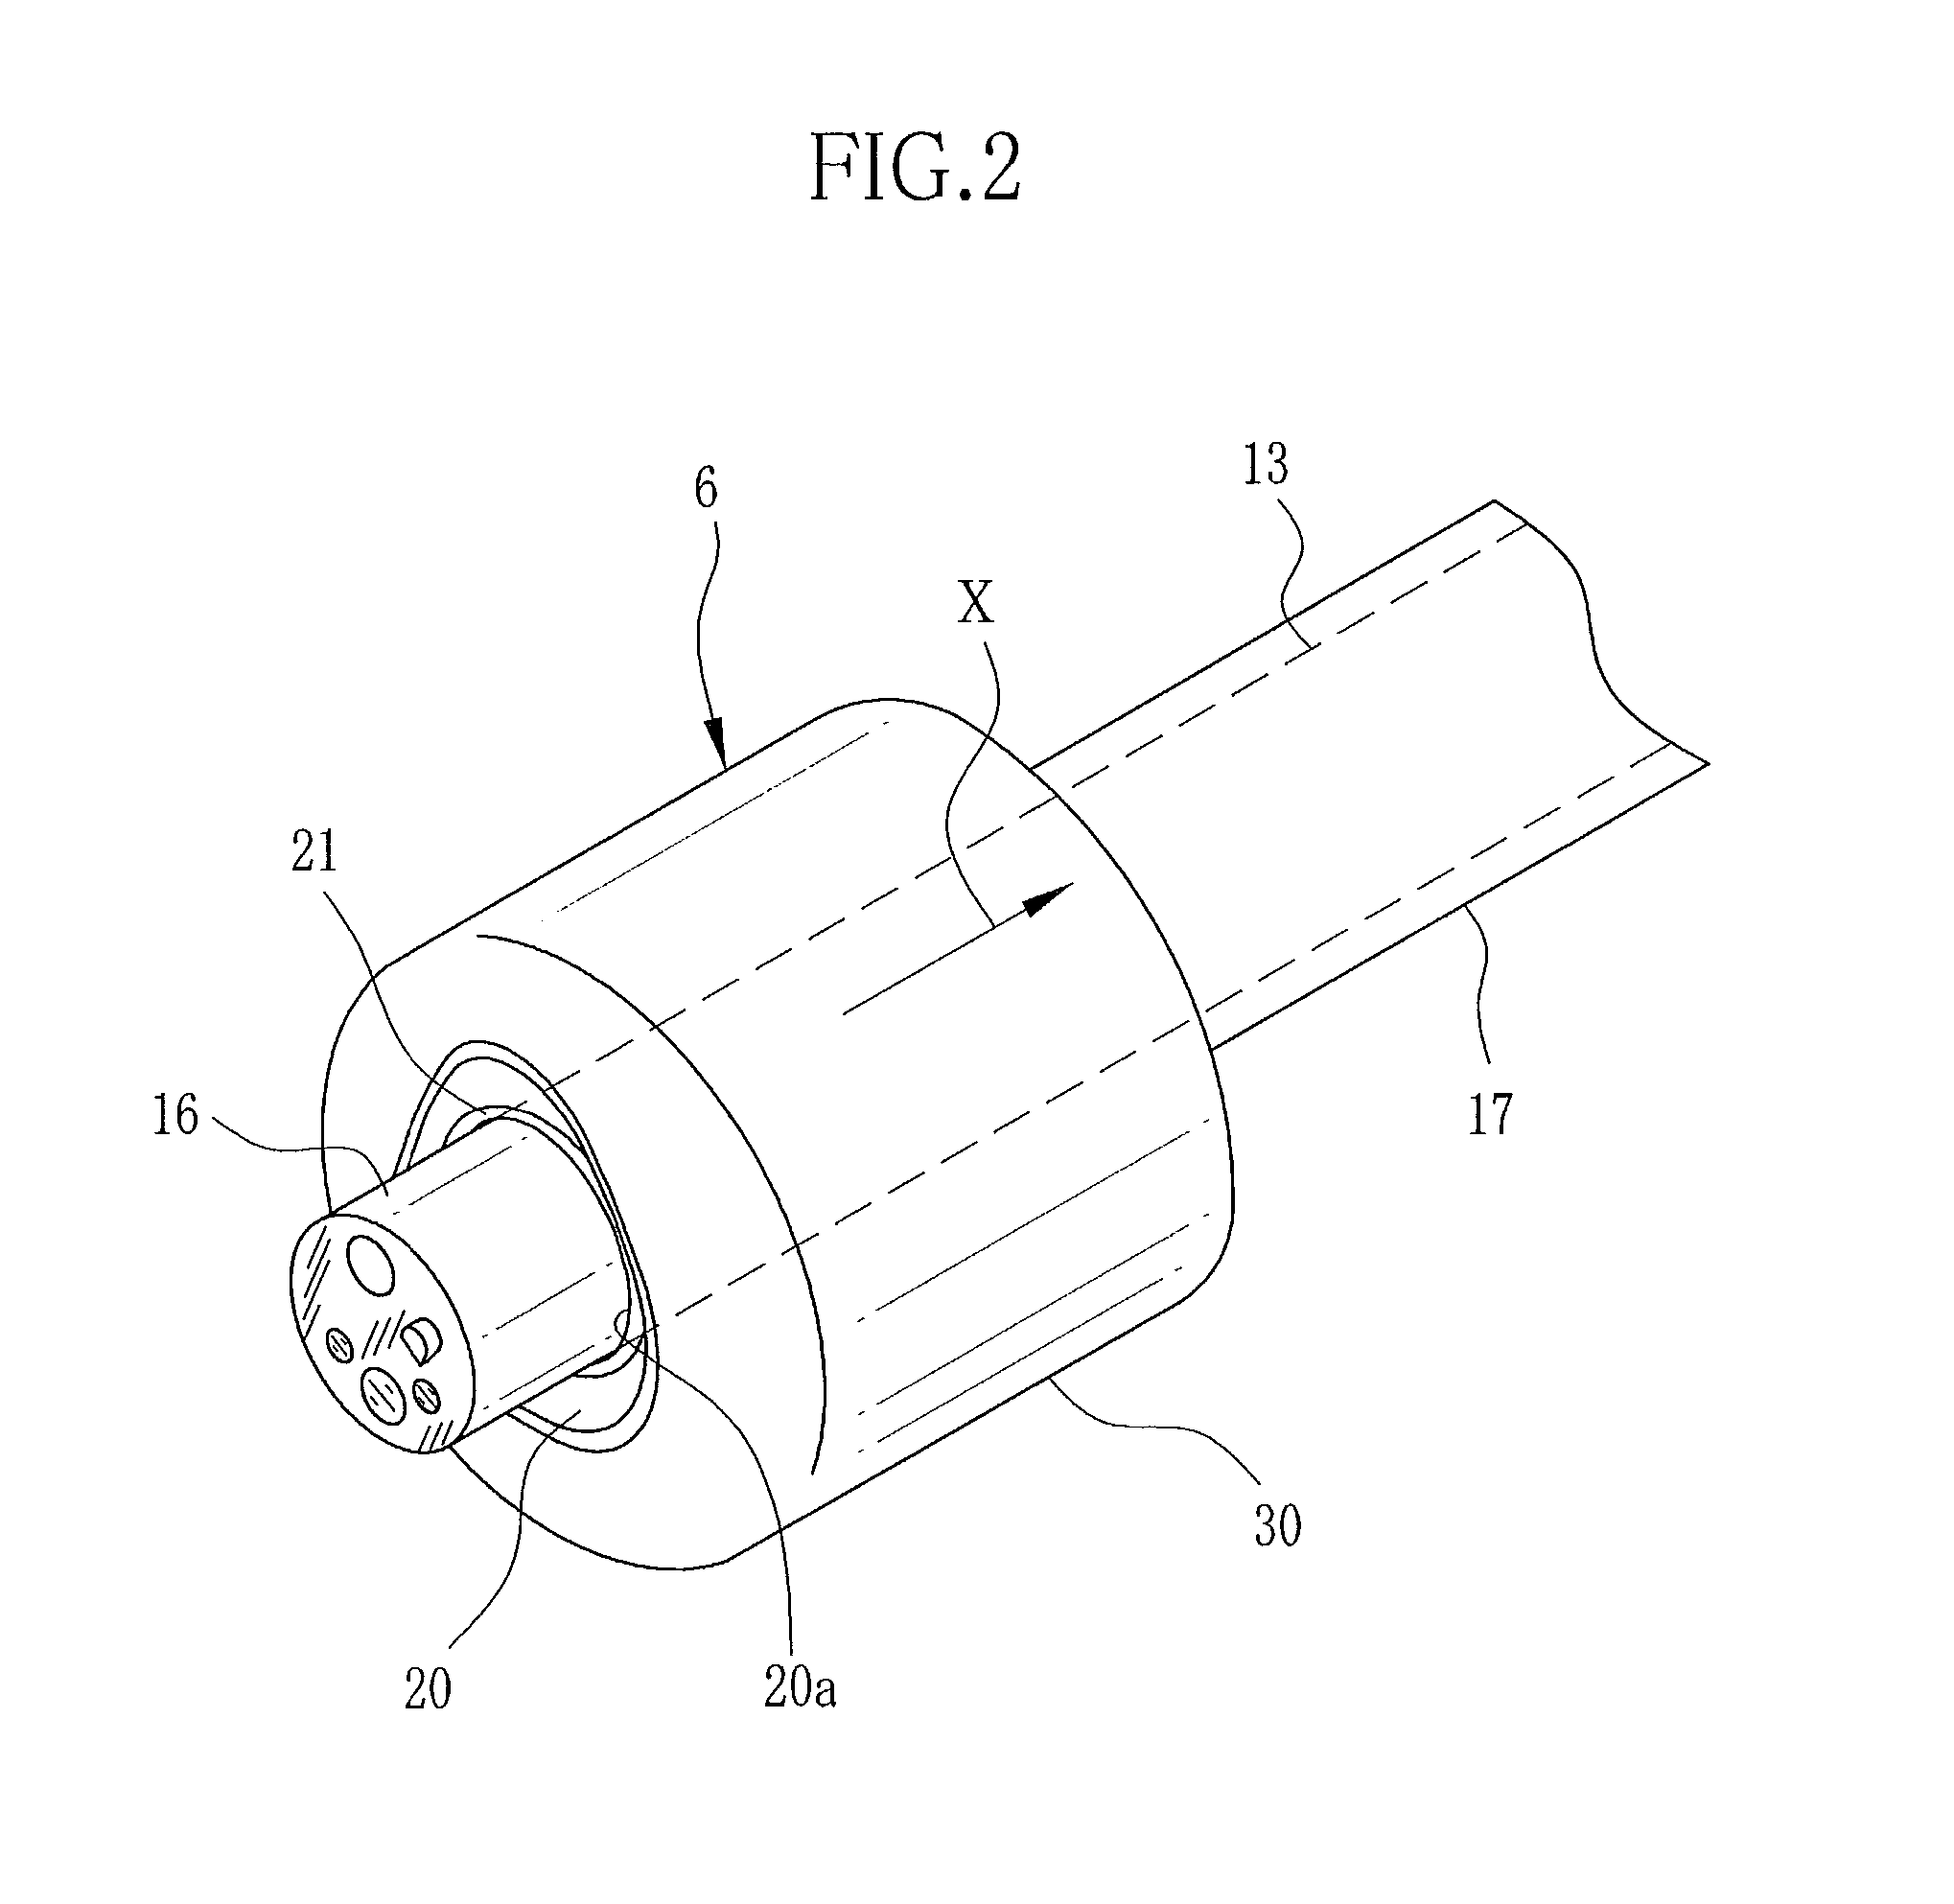 Insertion and extraction assisting device and endoscope system